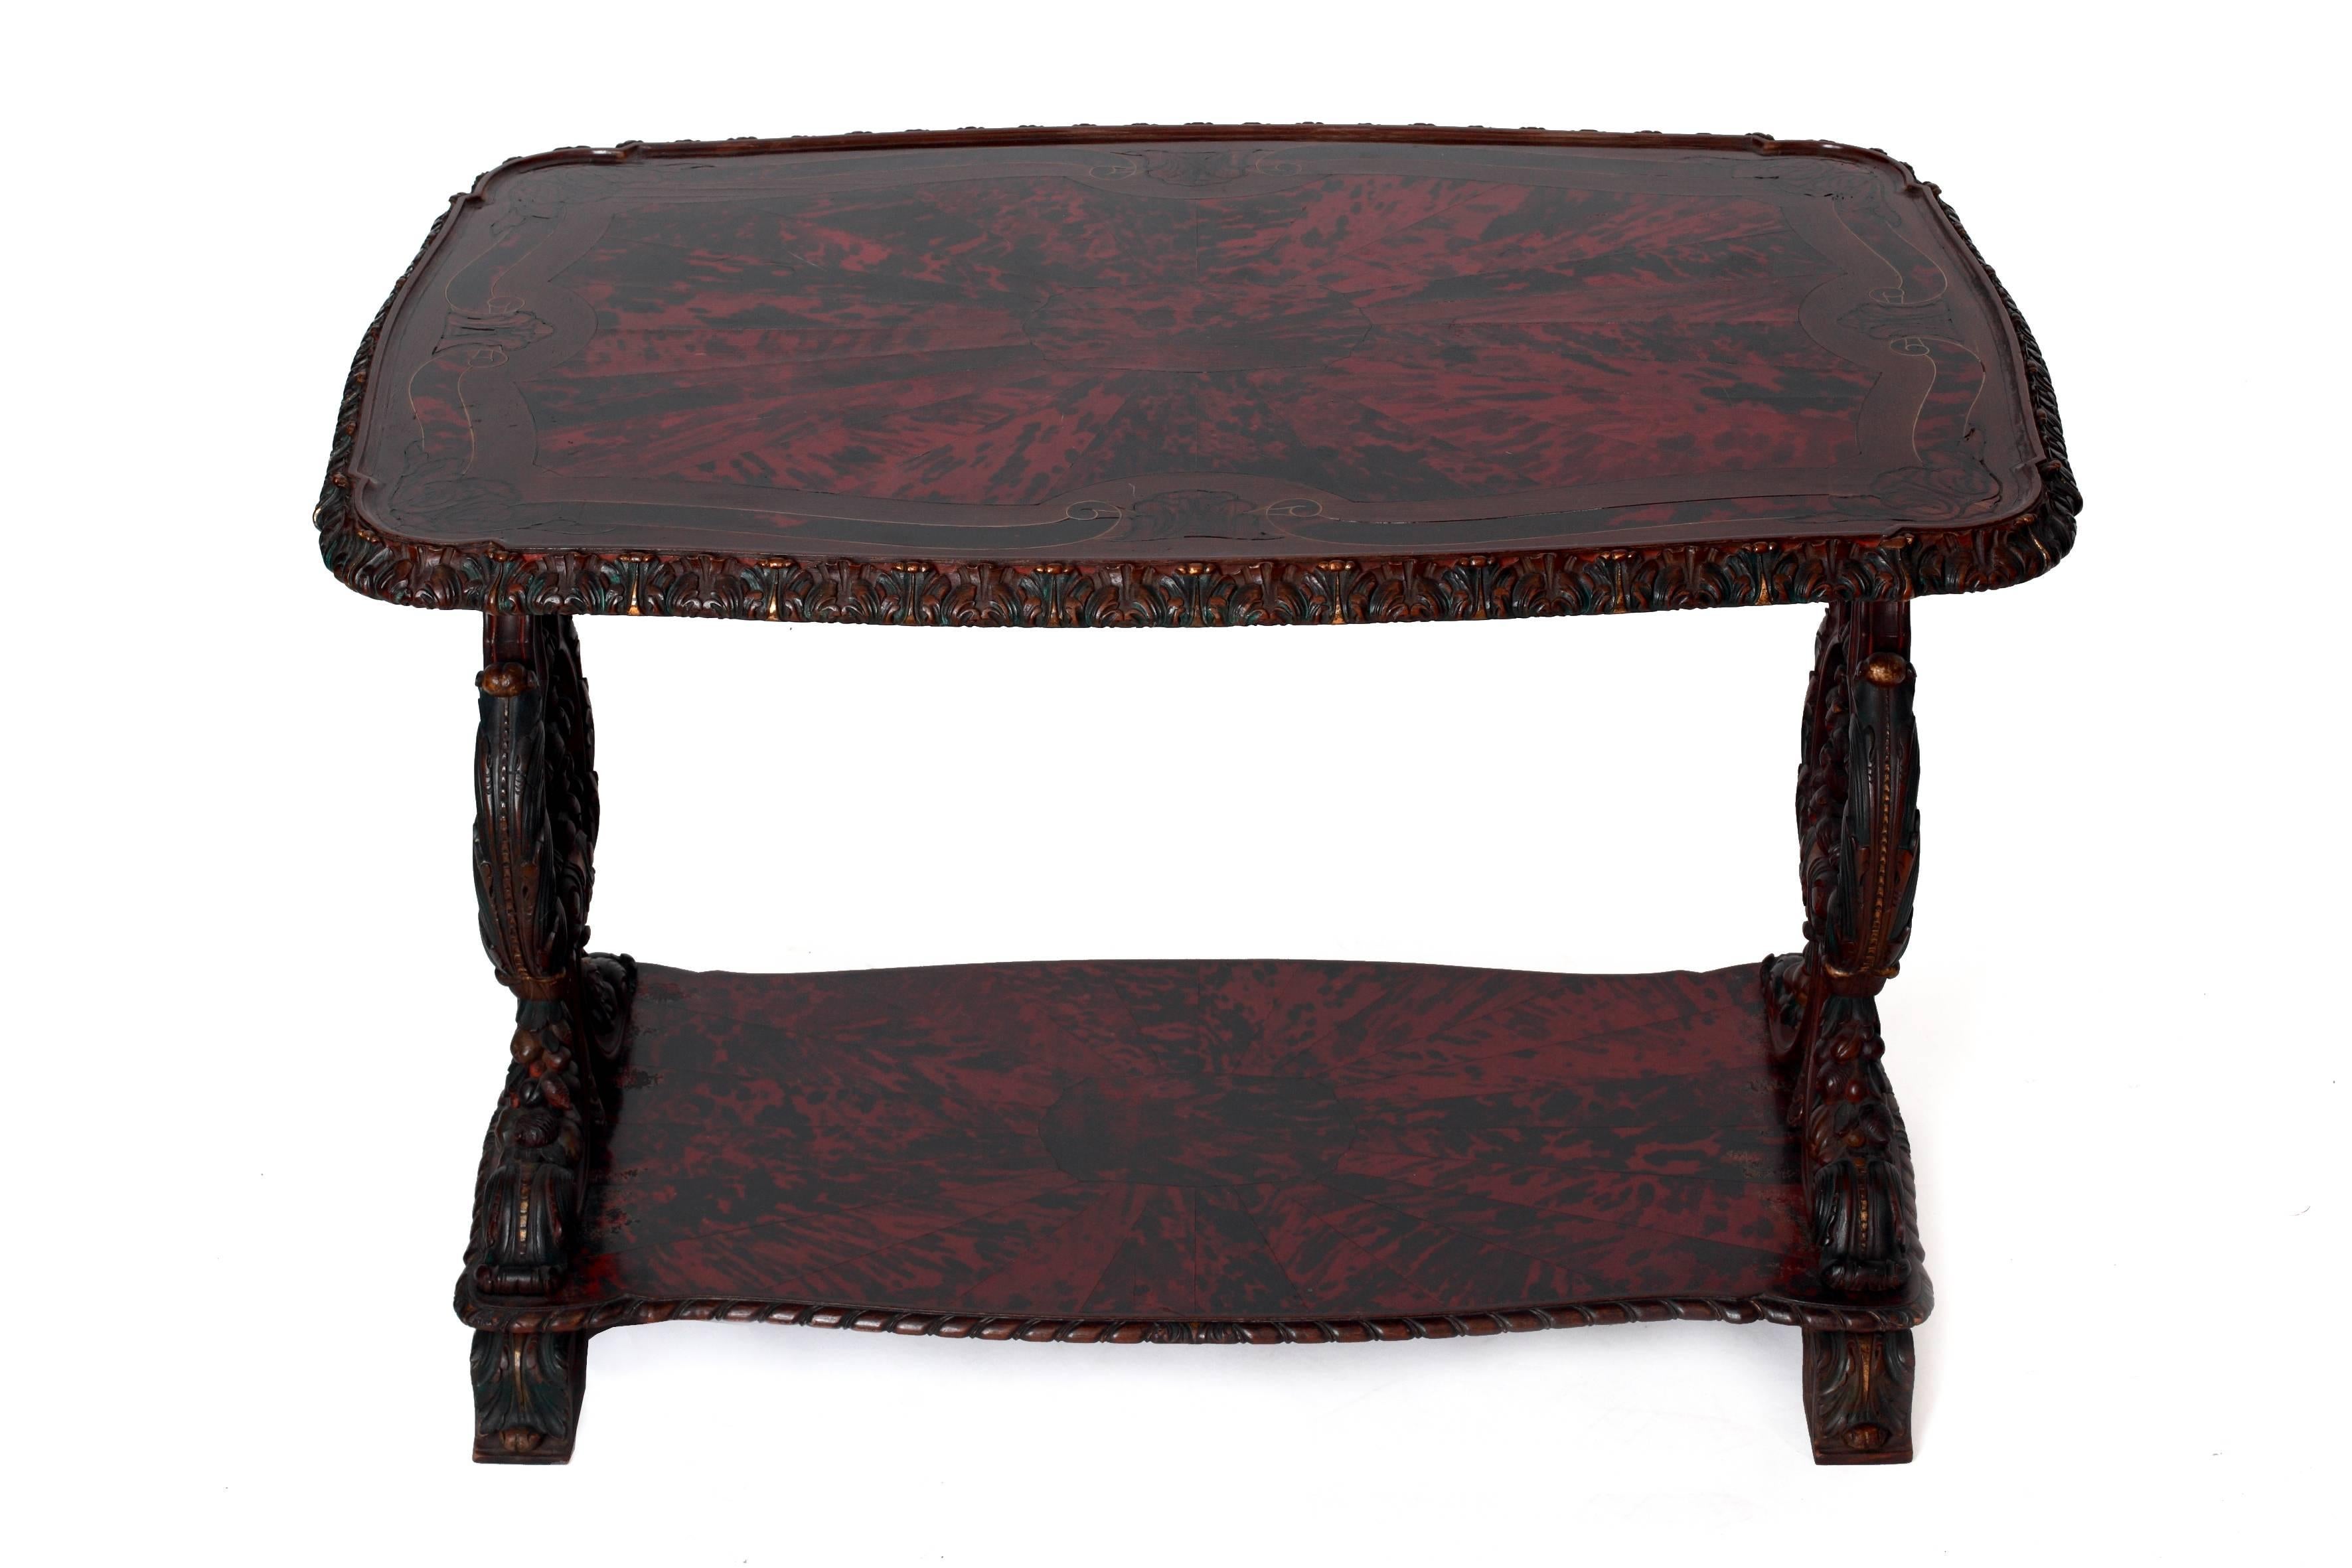 'Maison Franck' coffee table with veneered top in red tortoiseshell and various types of wood supported by two sumptuous carved and lyre-shaped supports joined by a supplementary tray.

Period 1920s-1930s

The top is decorated with geometric and